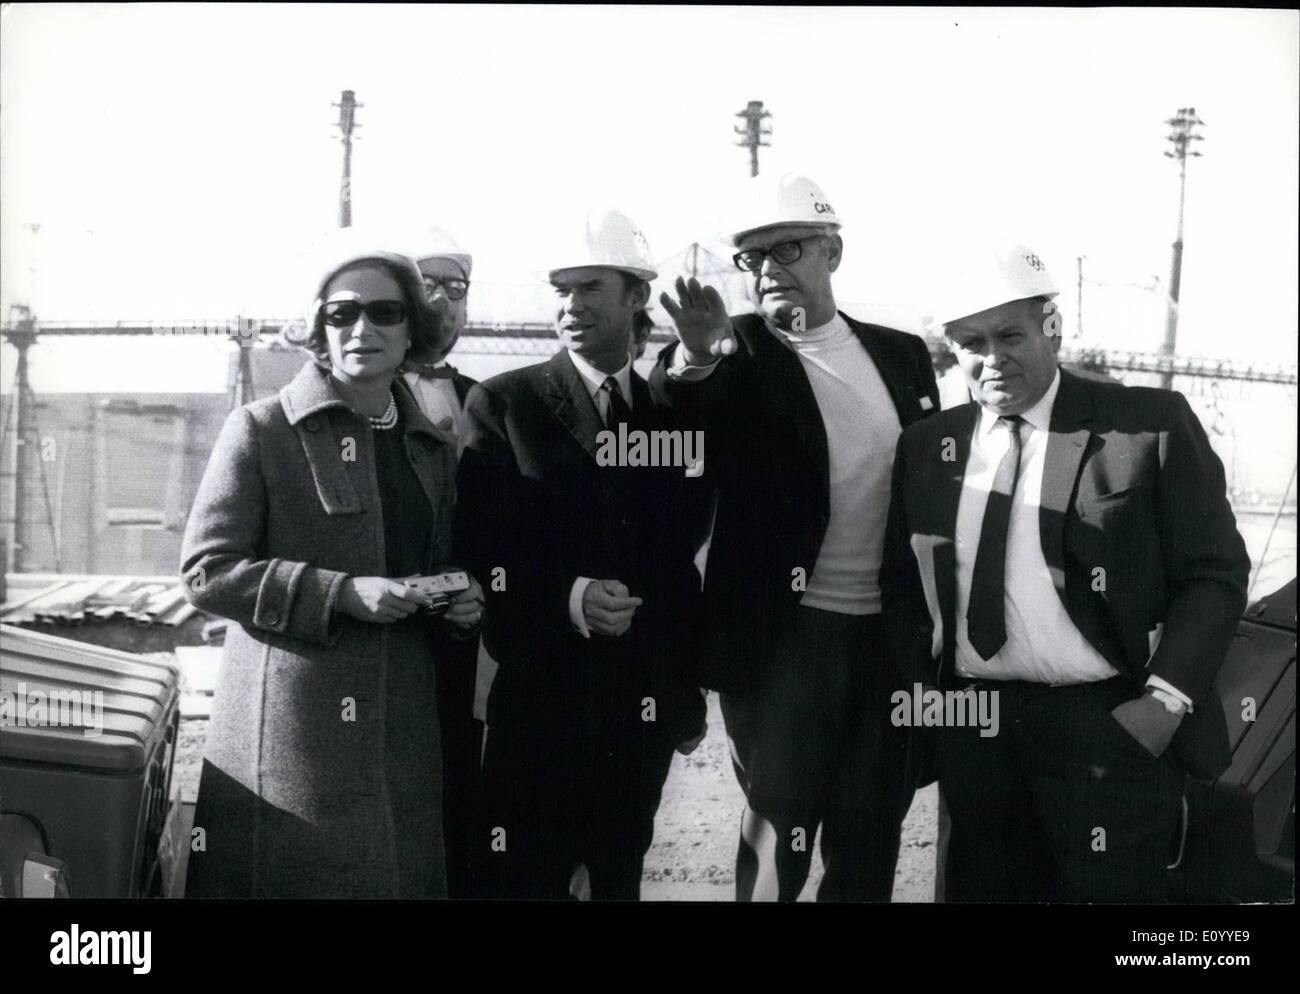 Nov. 11, 1971 - The Grand Duke and Grand Duchess of Luxembourg on an official visit to the Olympic building site in Munich.: Following a personal invitation by Herr Willi Baume, President of the Olympic Committee, Grand Duke Jean and Grand Duchess Charlotte of Luxembourg arrived in the Bavarian capital to take a look at the progress on the construction site. The Grand Duke has himself been a member of the International Olympic Committee since 1946. Even the aristocratic status of the visitors did not excempt then from wearing the compulsory safety helmet Stock Photo